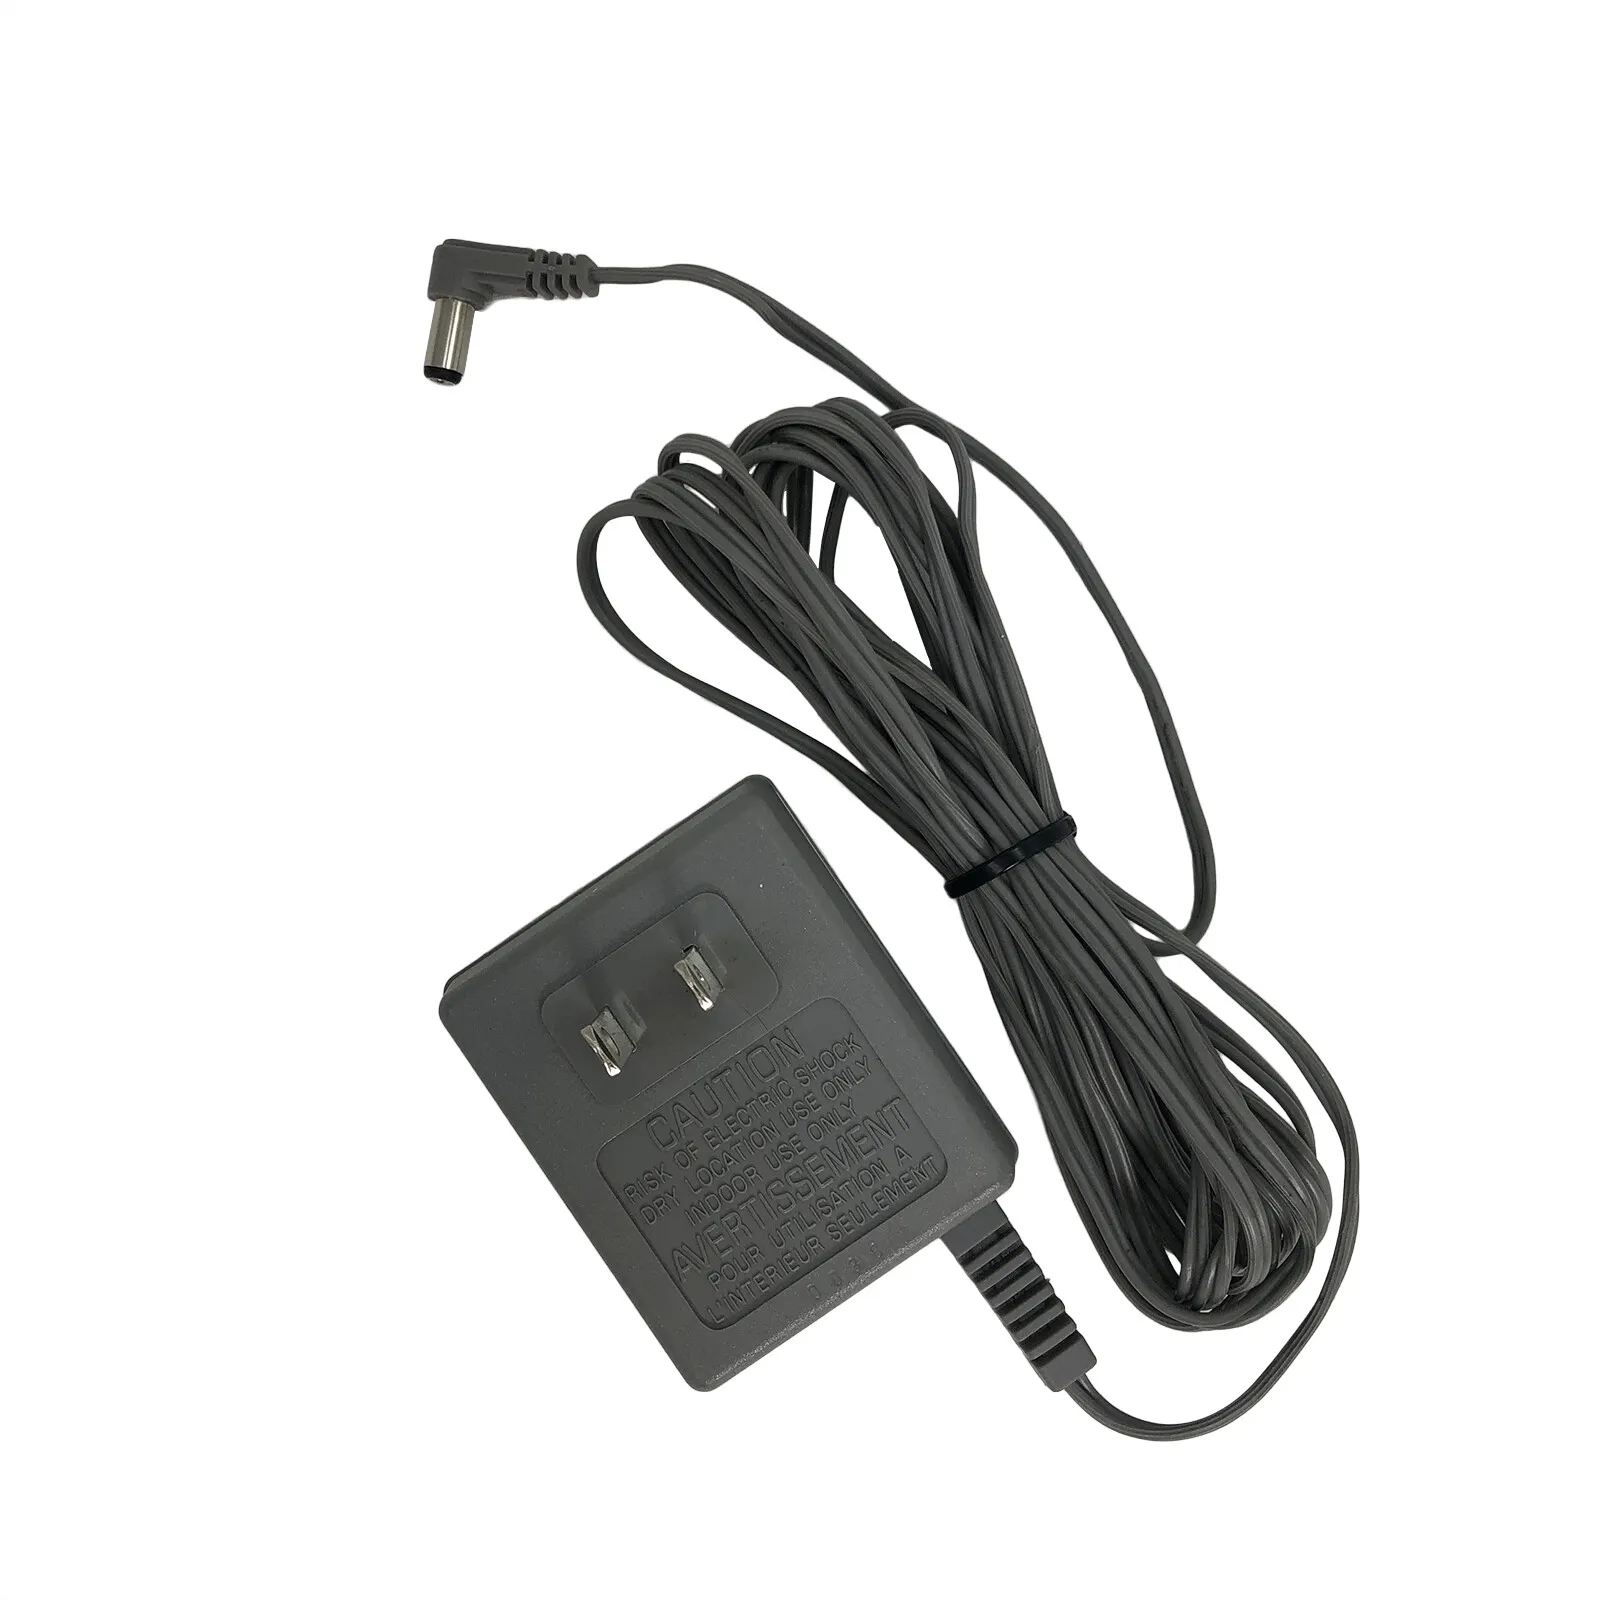 *Brand NEW*Ault Genuine 16.5V 0.25A AC Adapter for Nortel Meridian M8000 M9000 Series Phones POWER Supply